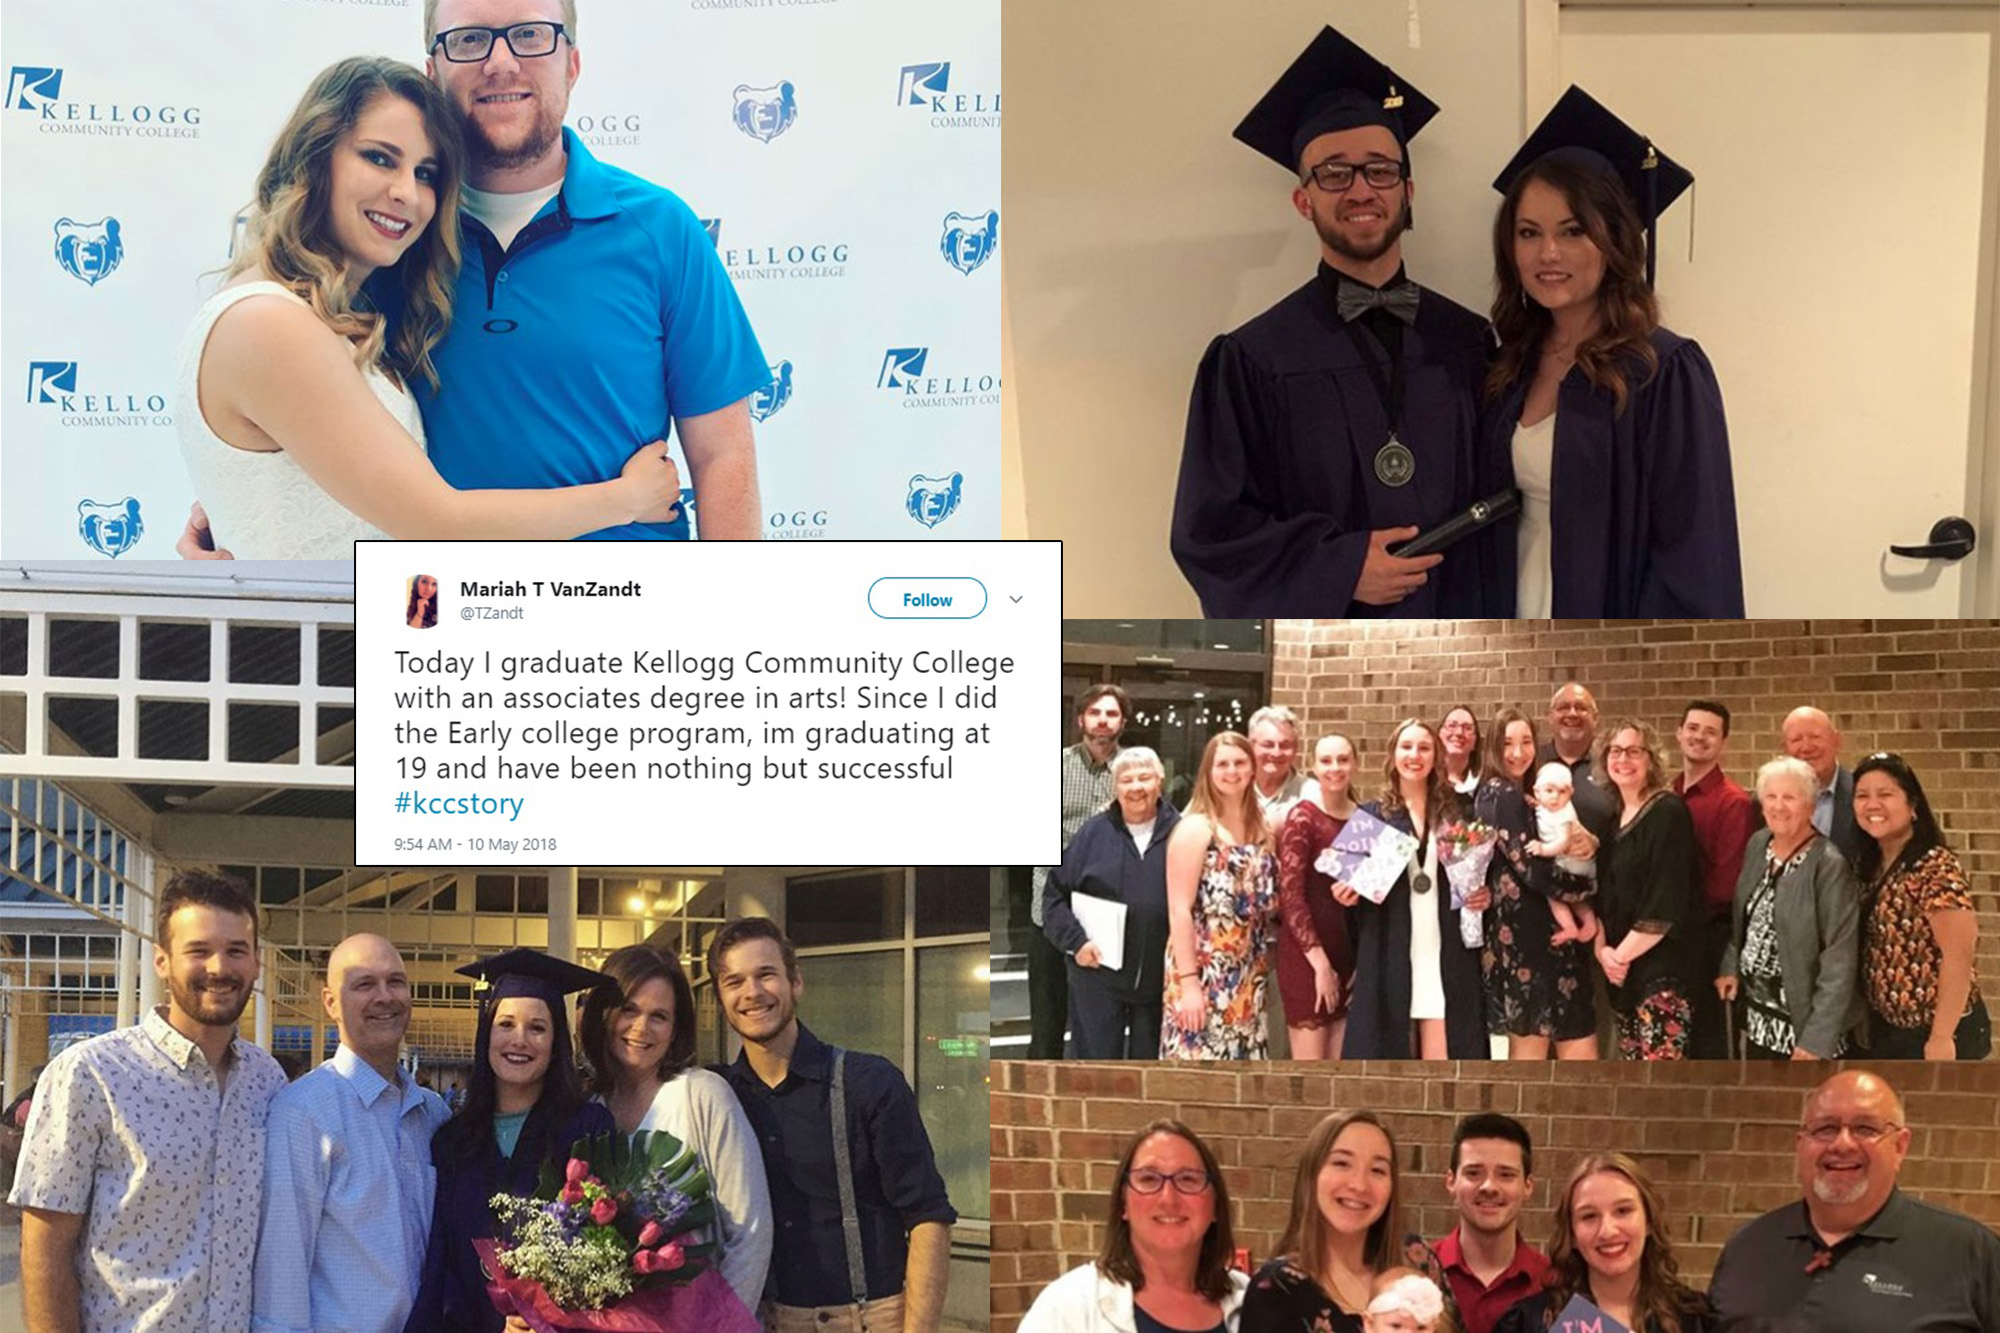 Photos of graduates and their friends and family members from various social media posts, collaged together to show the winners of a social media post contest.